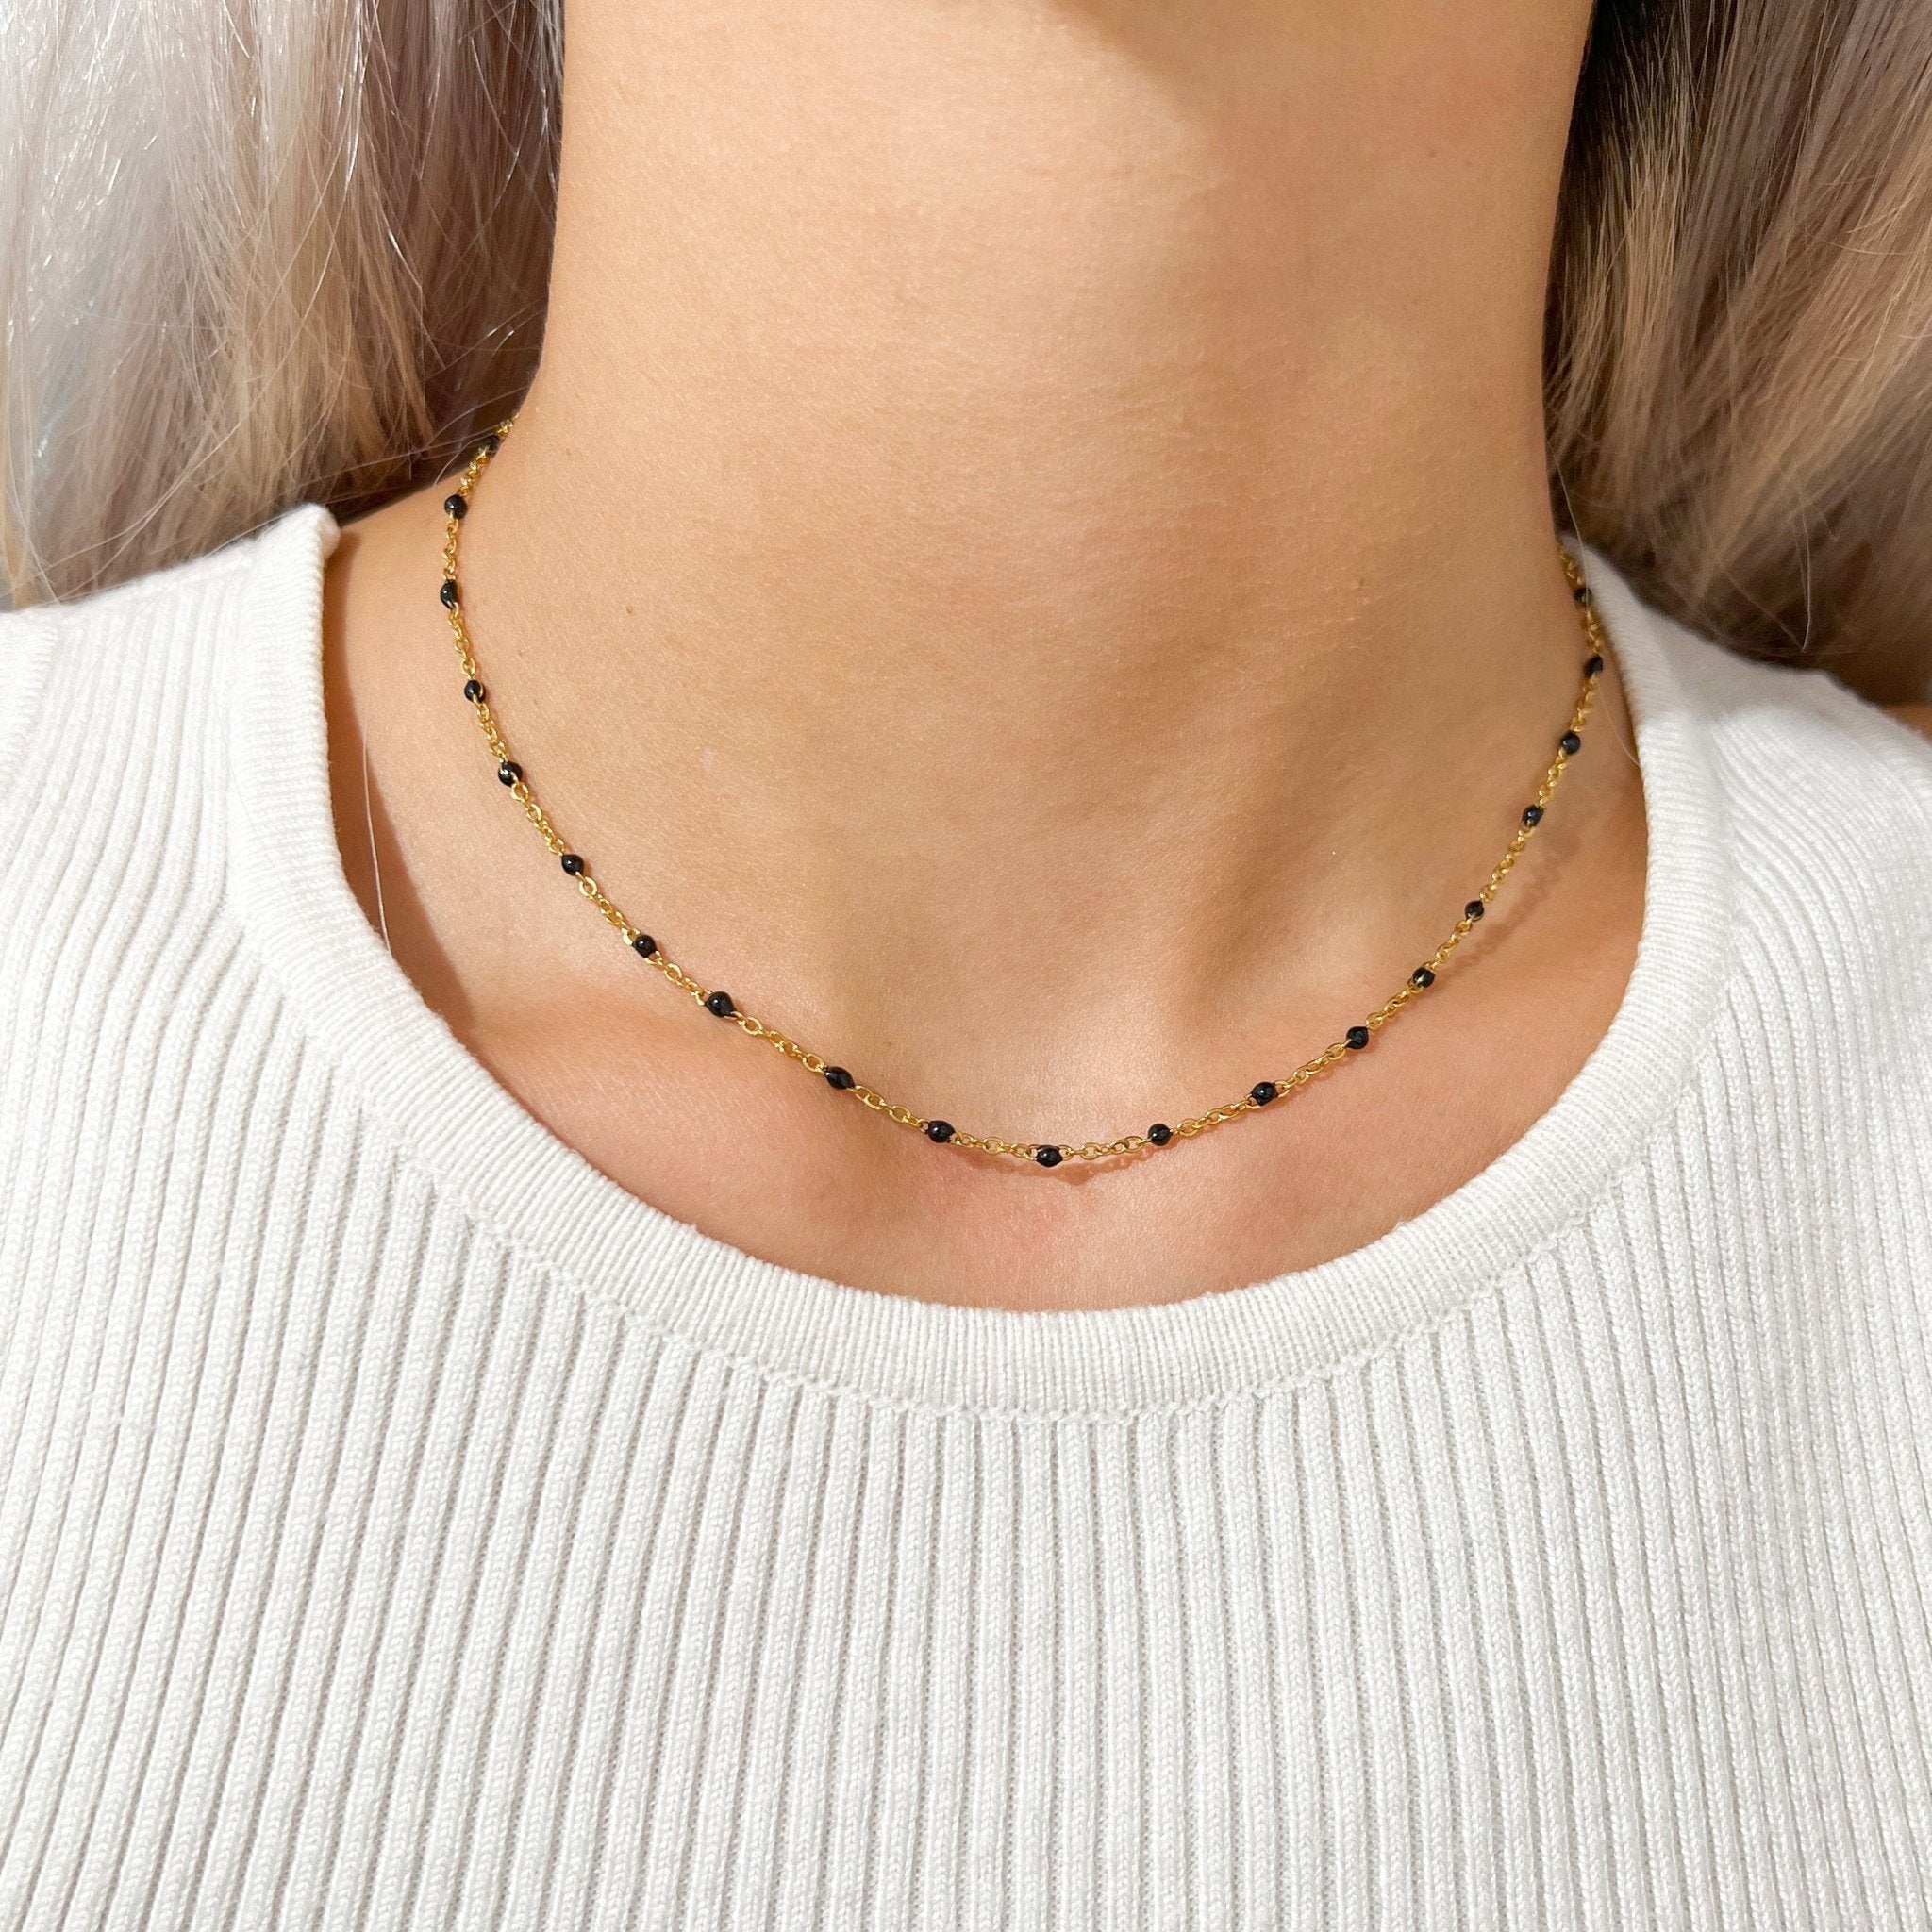 Black Enamel Bead Necklace in Gold - Flaire & Co.